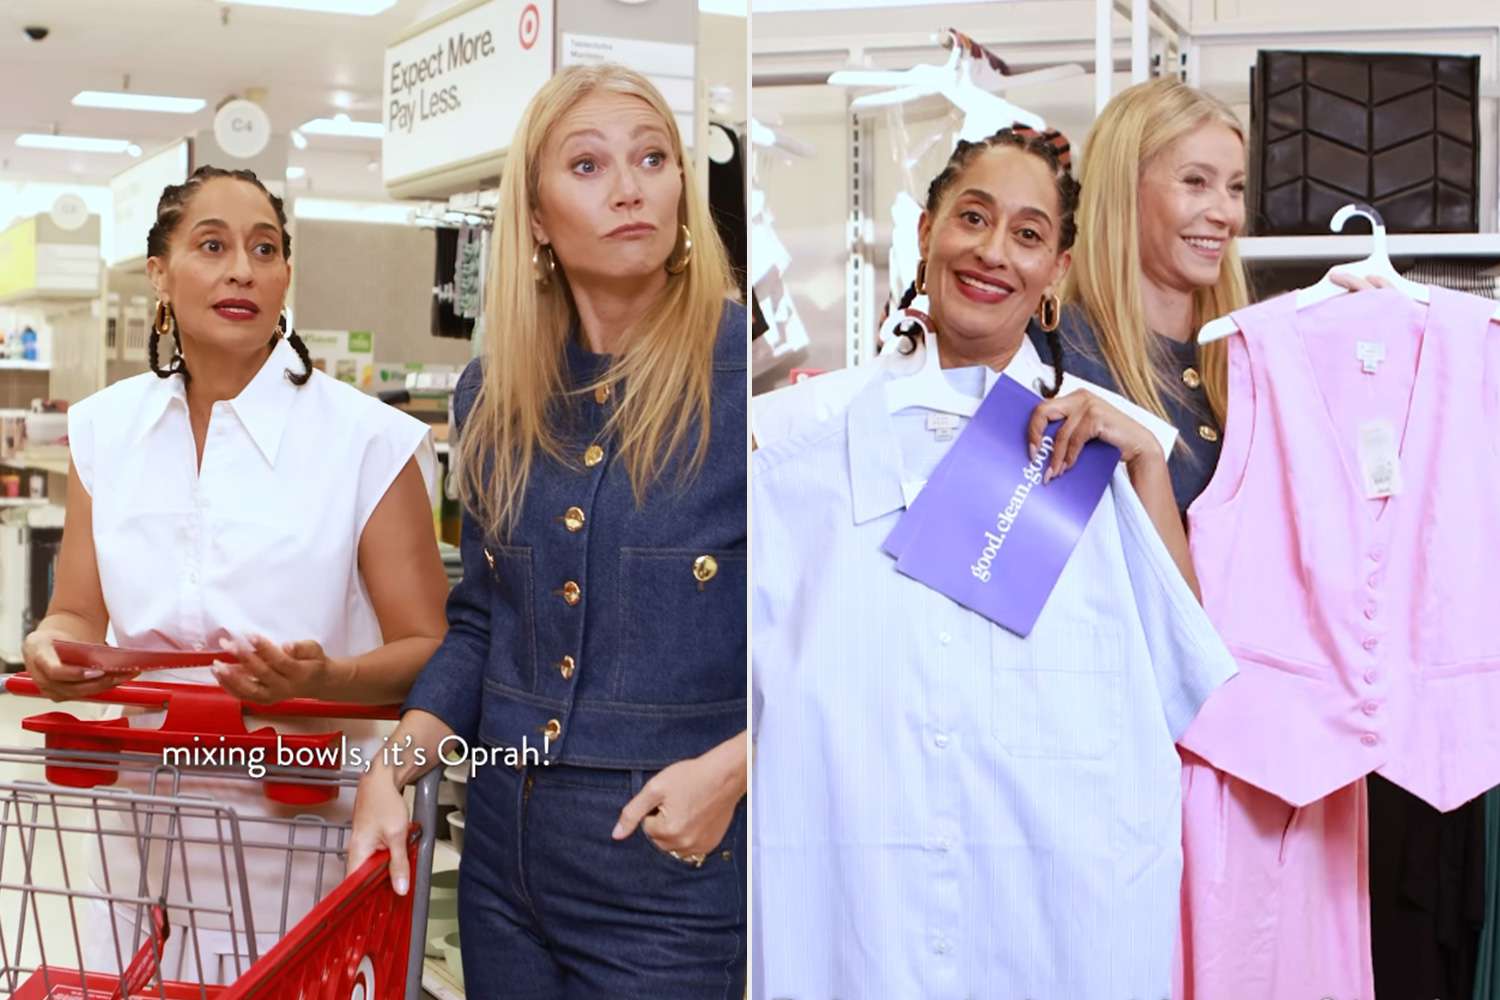 Watch Gwyneth Paltrow and Tracee Ellis Ross Shop at Target and Buy Matching Outfits: 'We Look Drunk'